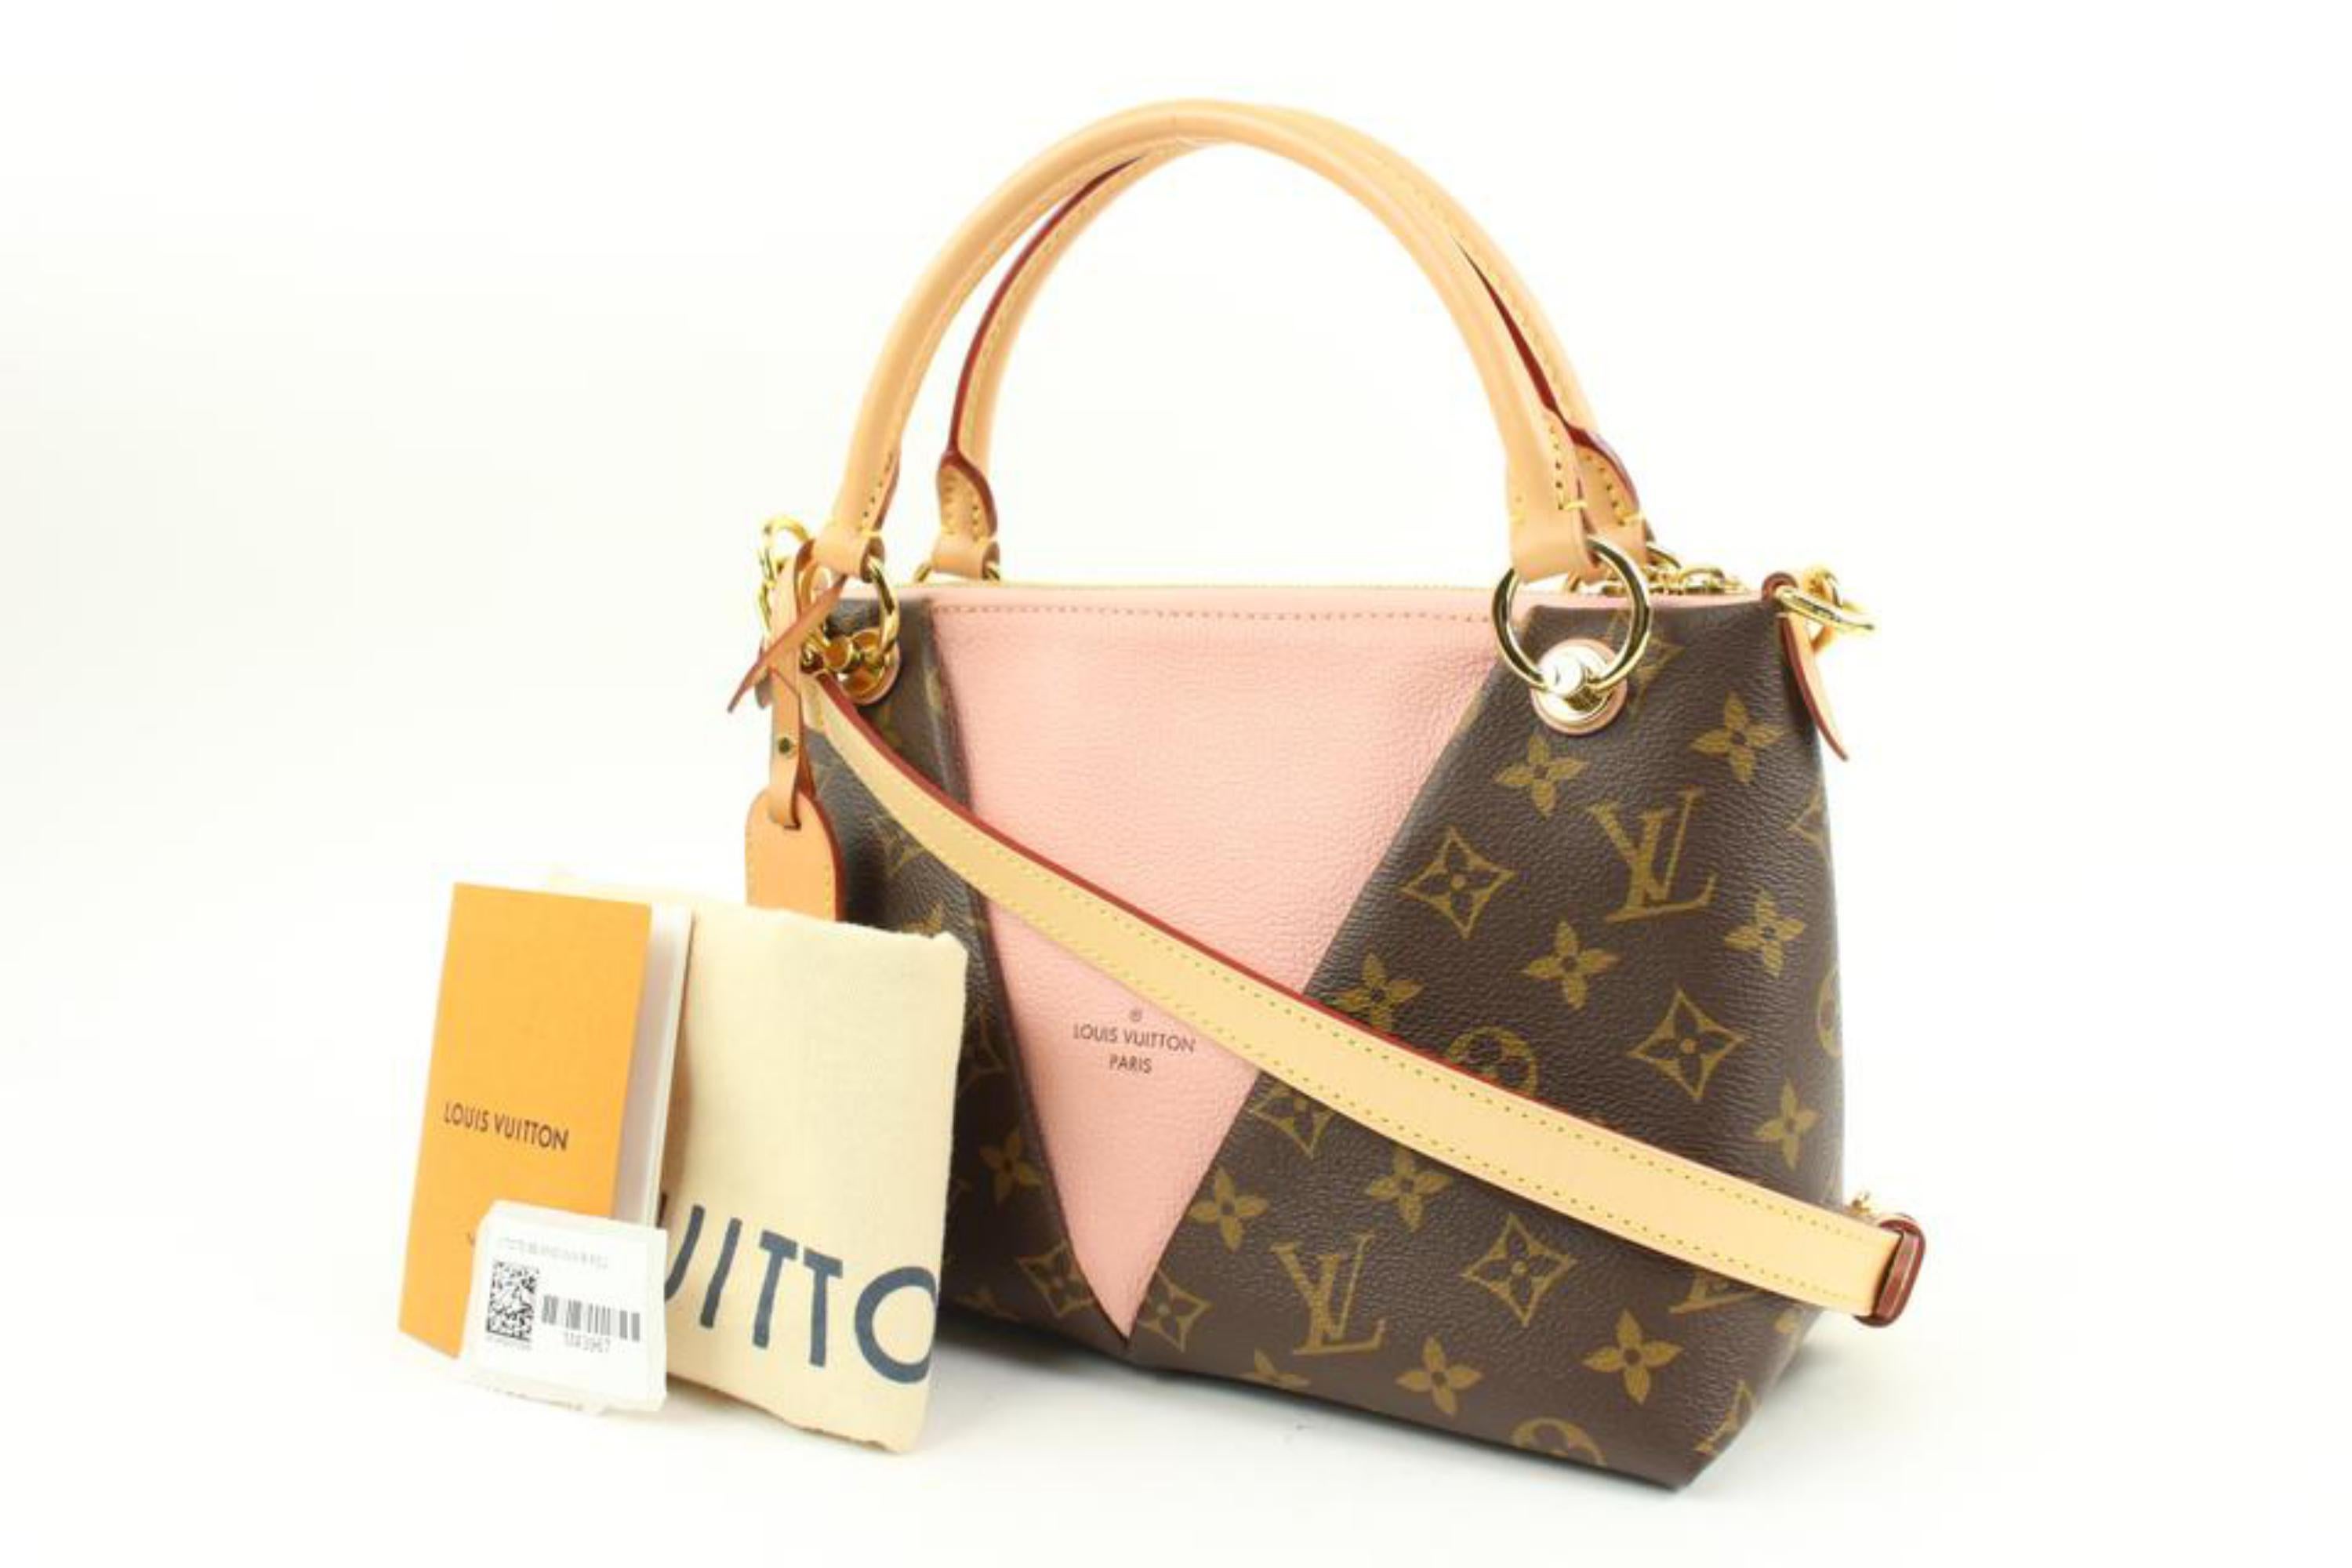 Louis Vuitton Discontinued Monogram x Pink V Tote BB 2way Crossbody 6LV3258
Date Code/Serial Number: CA2198
Made In: Spain
Measurements: Length:  11